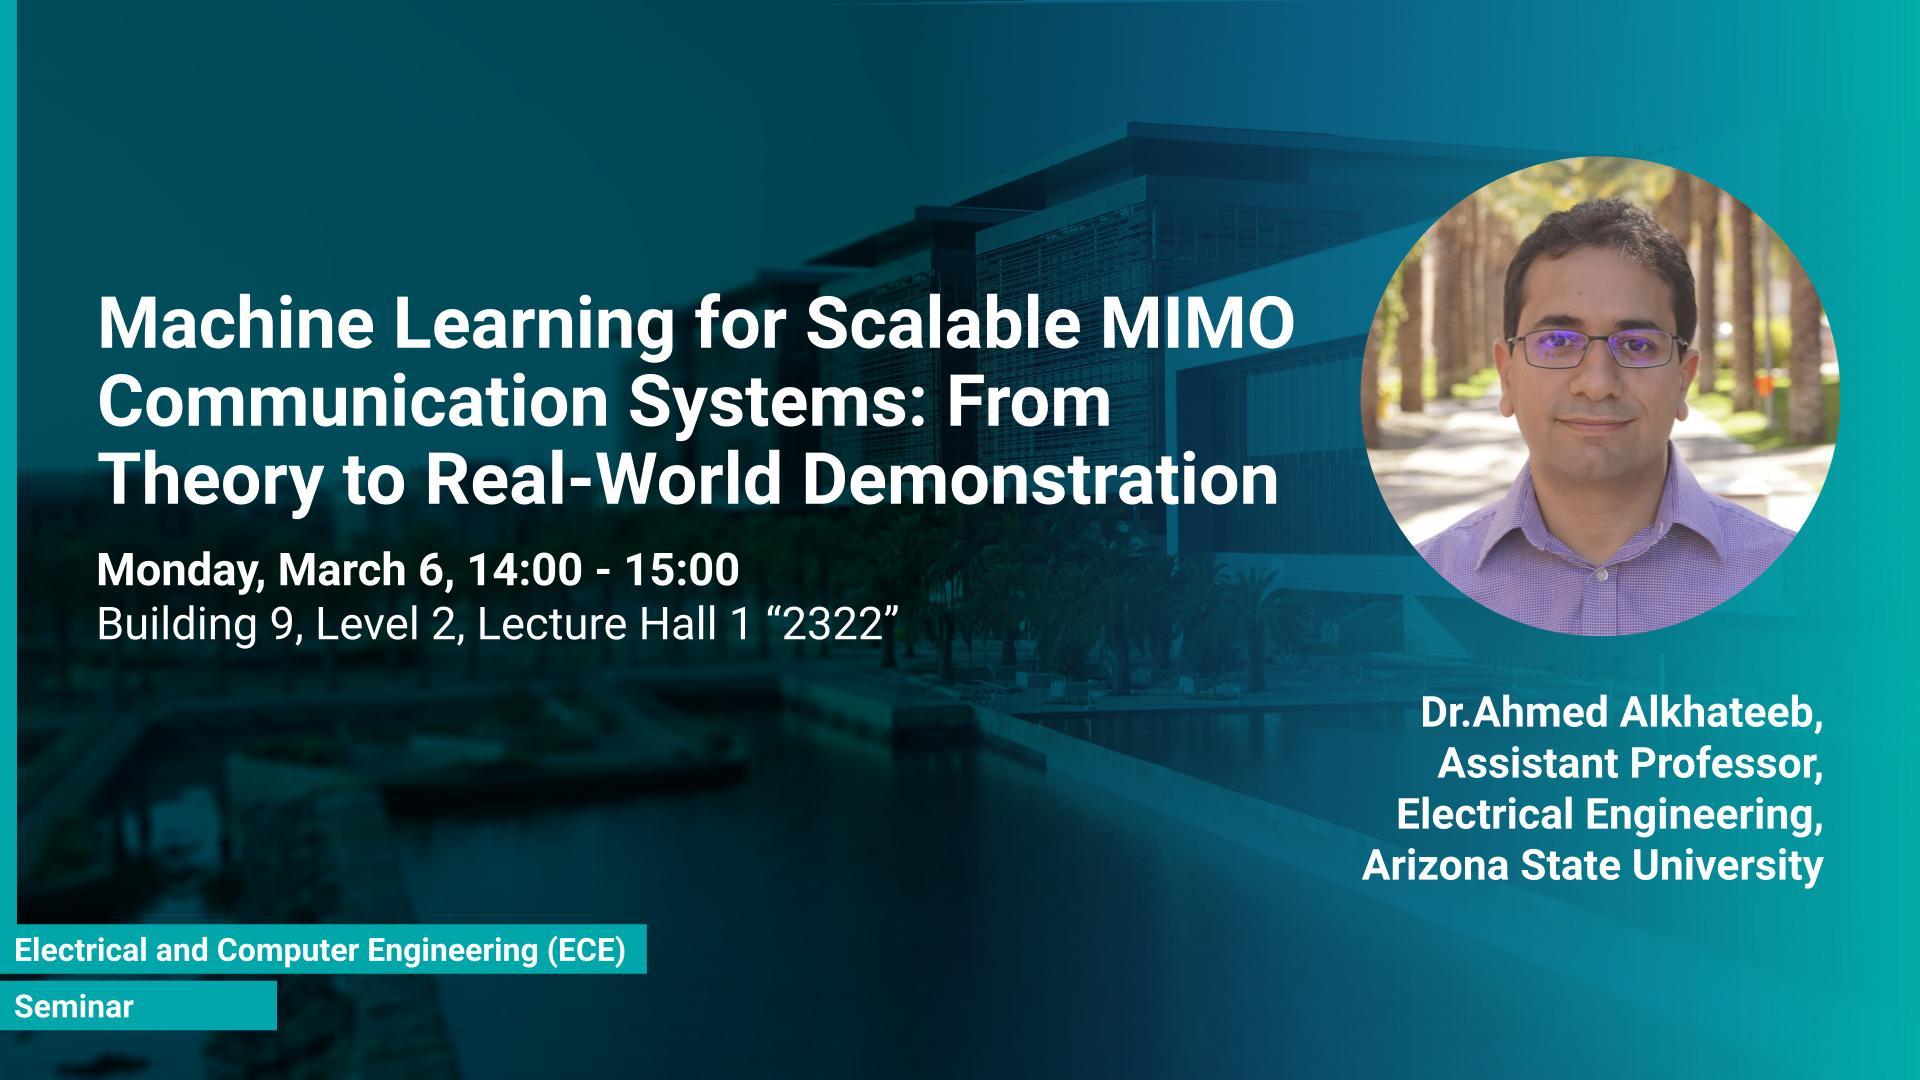 KAUST-CEMSE-ECE-Seminar-Ahmed-Alkhateeb-Machine Learning for Scalable MIMO Communication Systems: From Theory to Real-World Demonstration.jpg